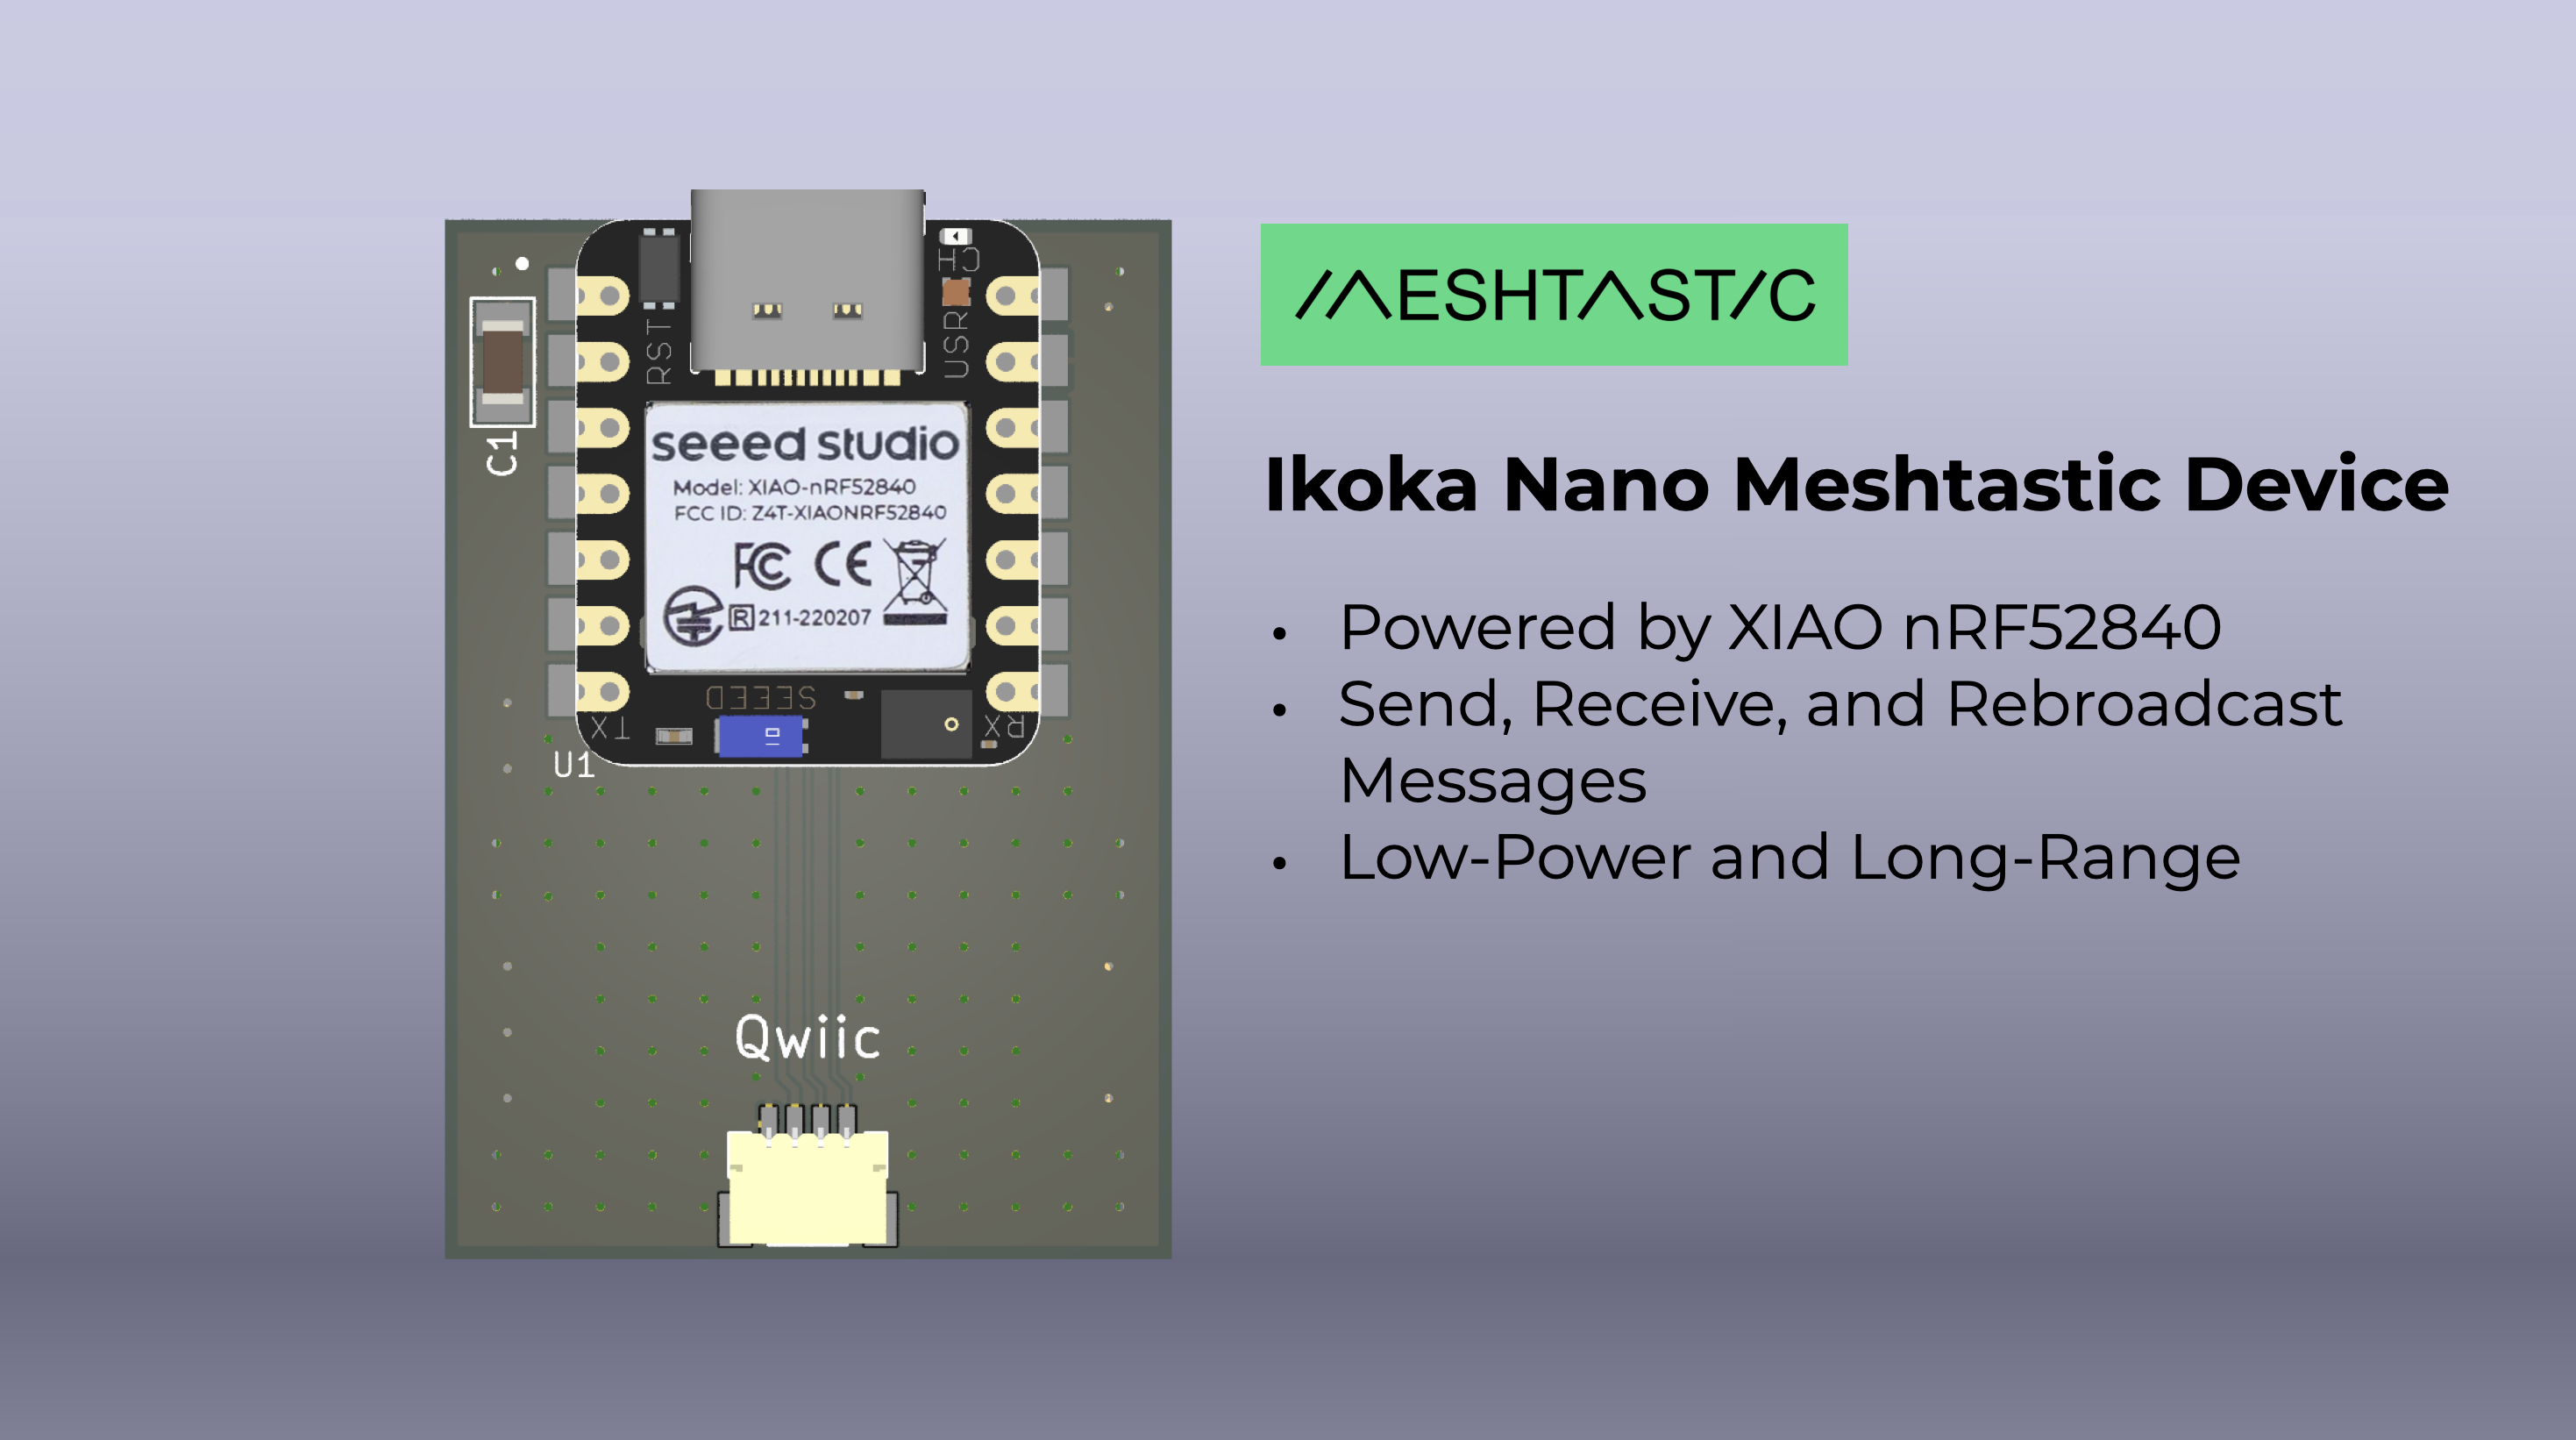 Turn Your XIAO nRF52840 into a Meshtastic Device to Send, Receive 